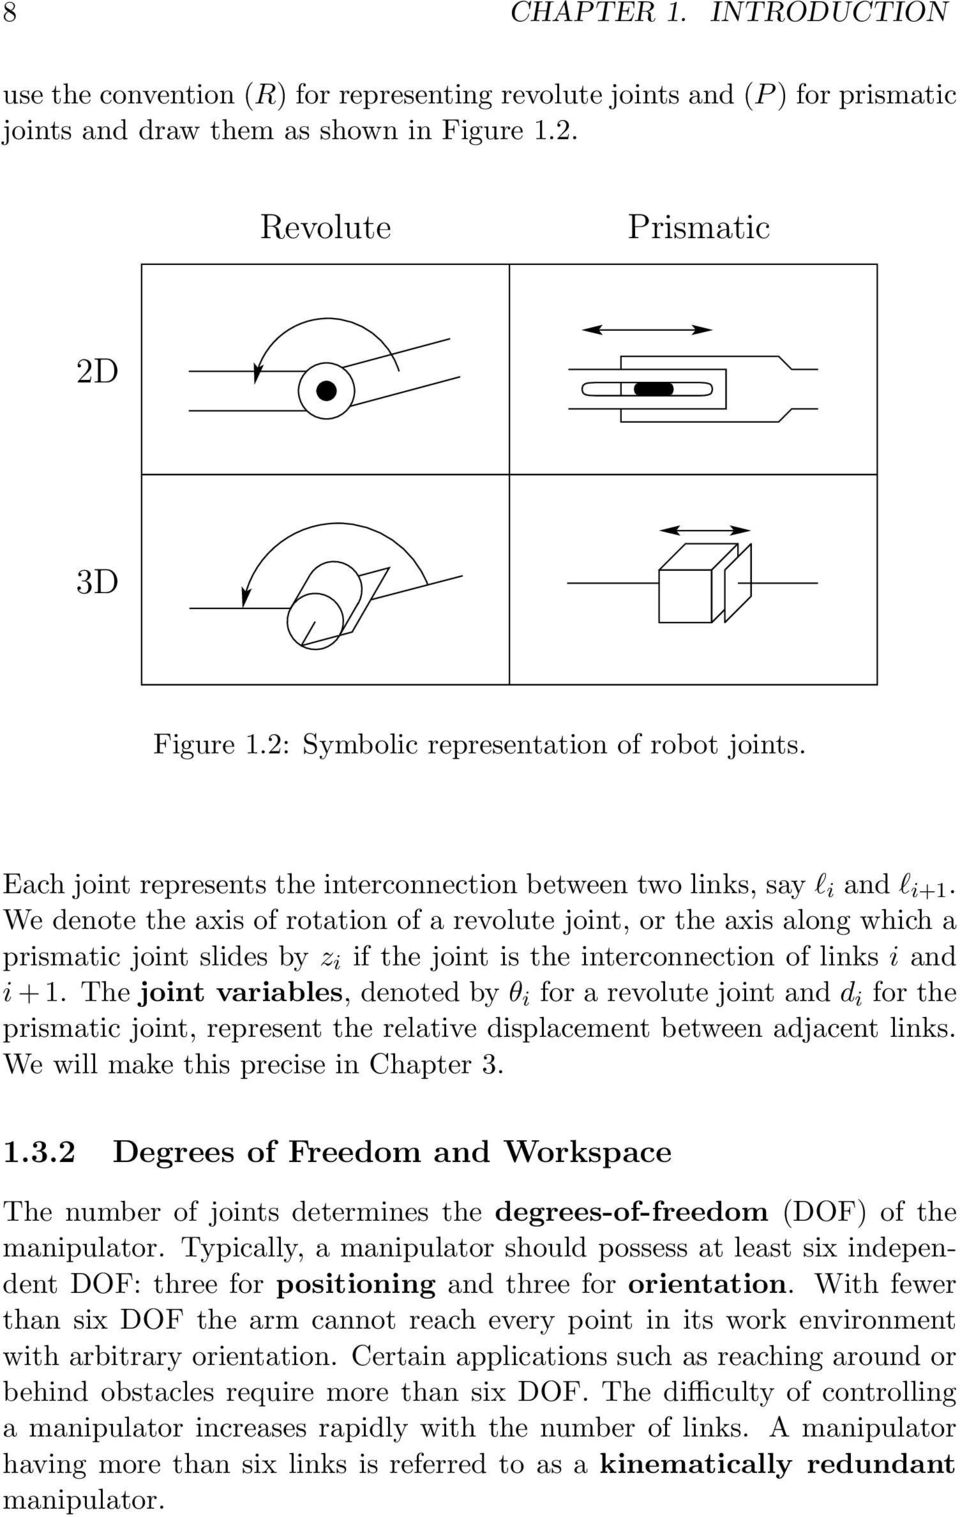 We denote the axis of rotation of a revolute joint, or the axis along which a prismatic joint slides by z i if the joint is the interconnection of links i and i+1.